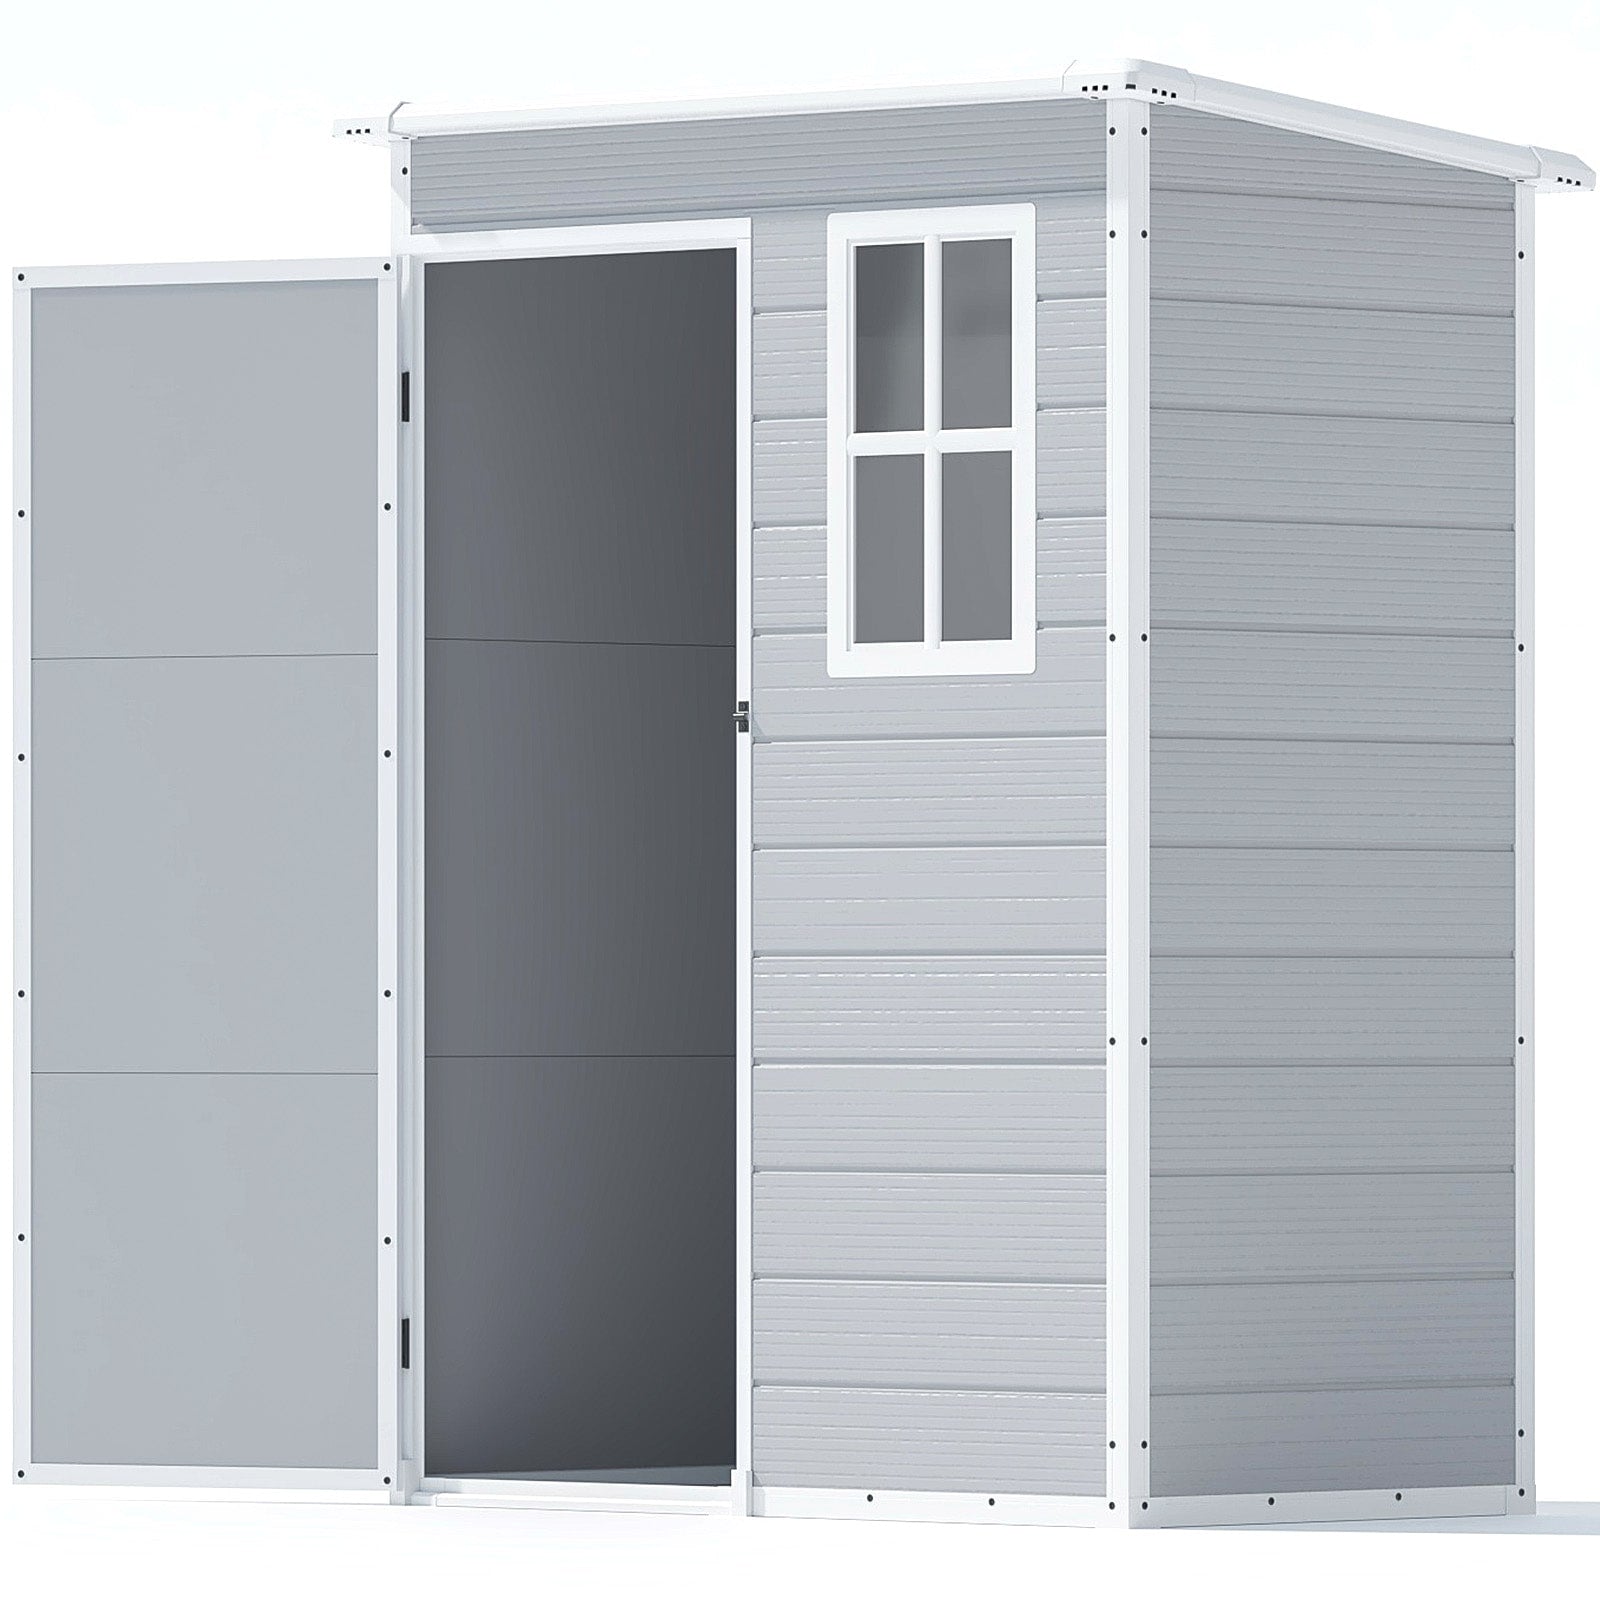 Patiowell 5x3 Plastic Shed-2